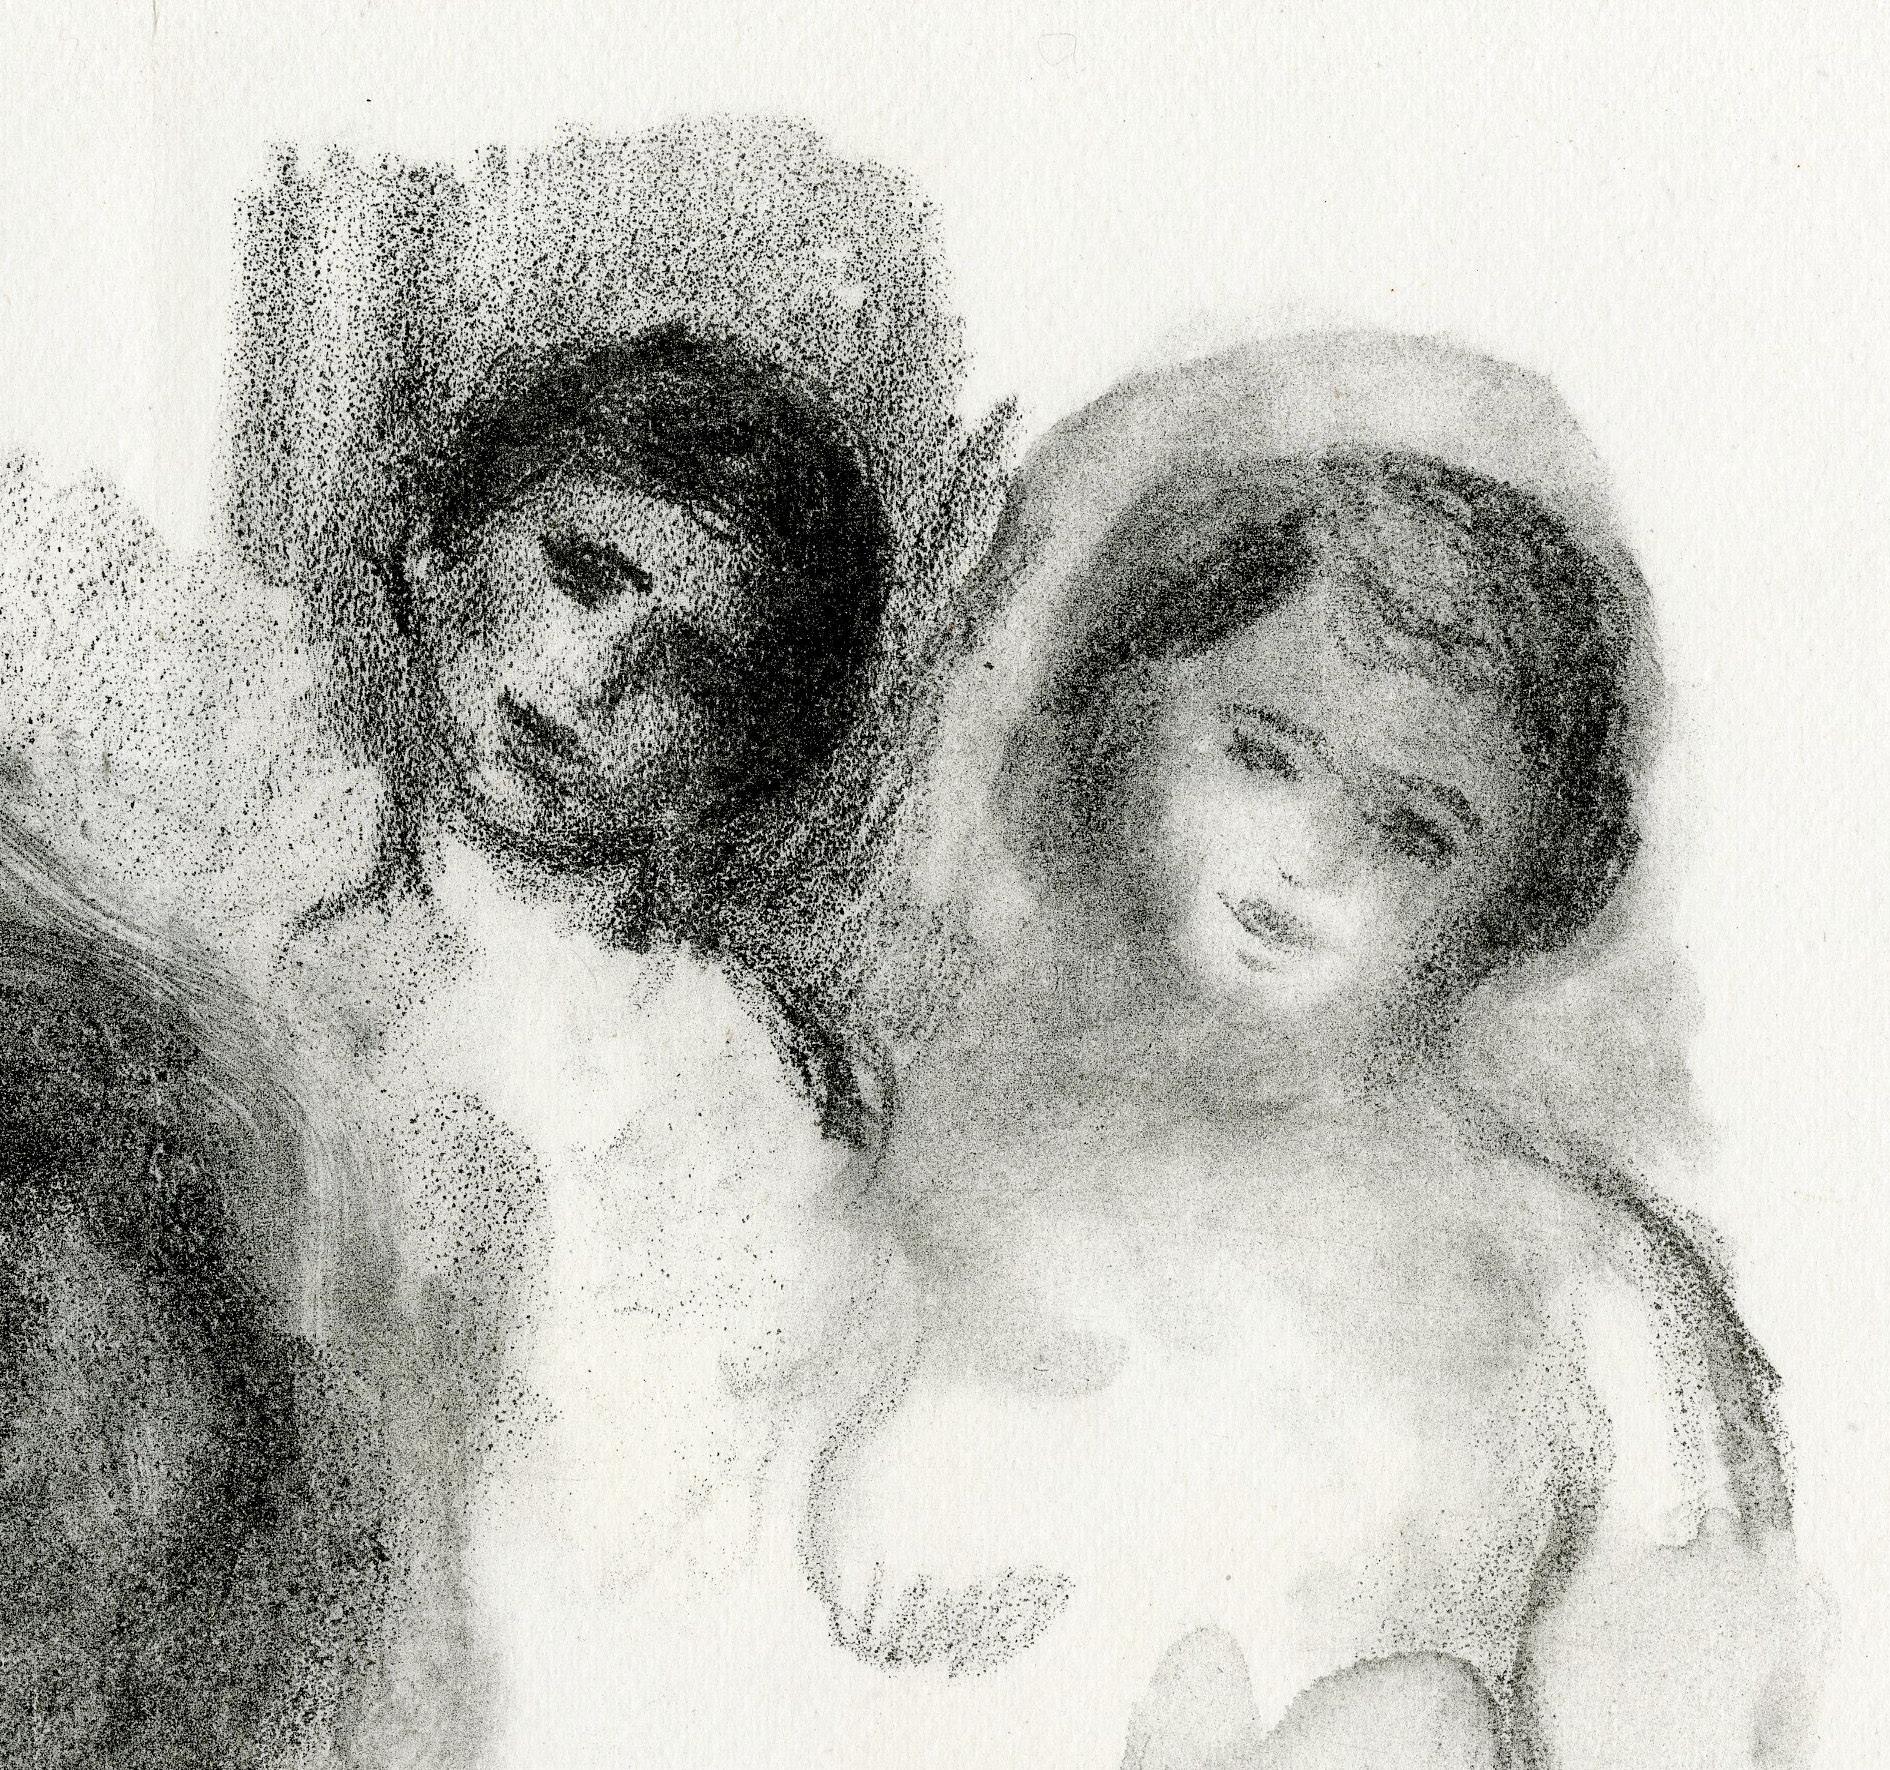 La Pierre aux Trois Croquis
From: Douze lithographies originales de Pierre-Auguste Renoir
Publisher: Ambrose Vollard
Edition: 950 (signed in the stone) on wove paper as here (see photo)
    There were also 50 hand signed impressions
Printer: Auguste